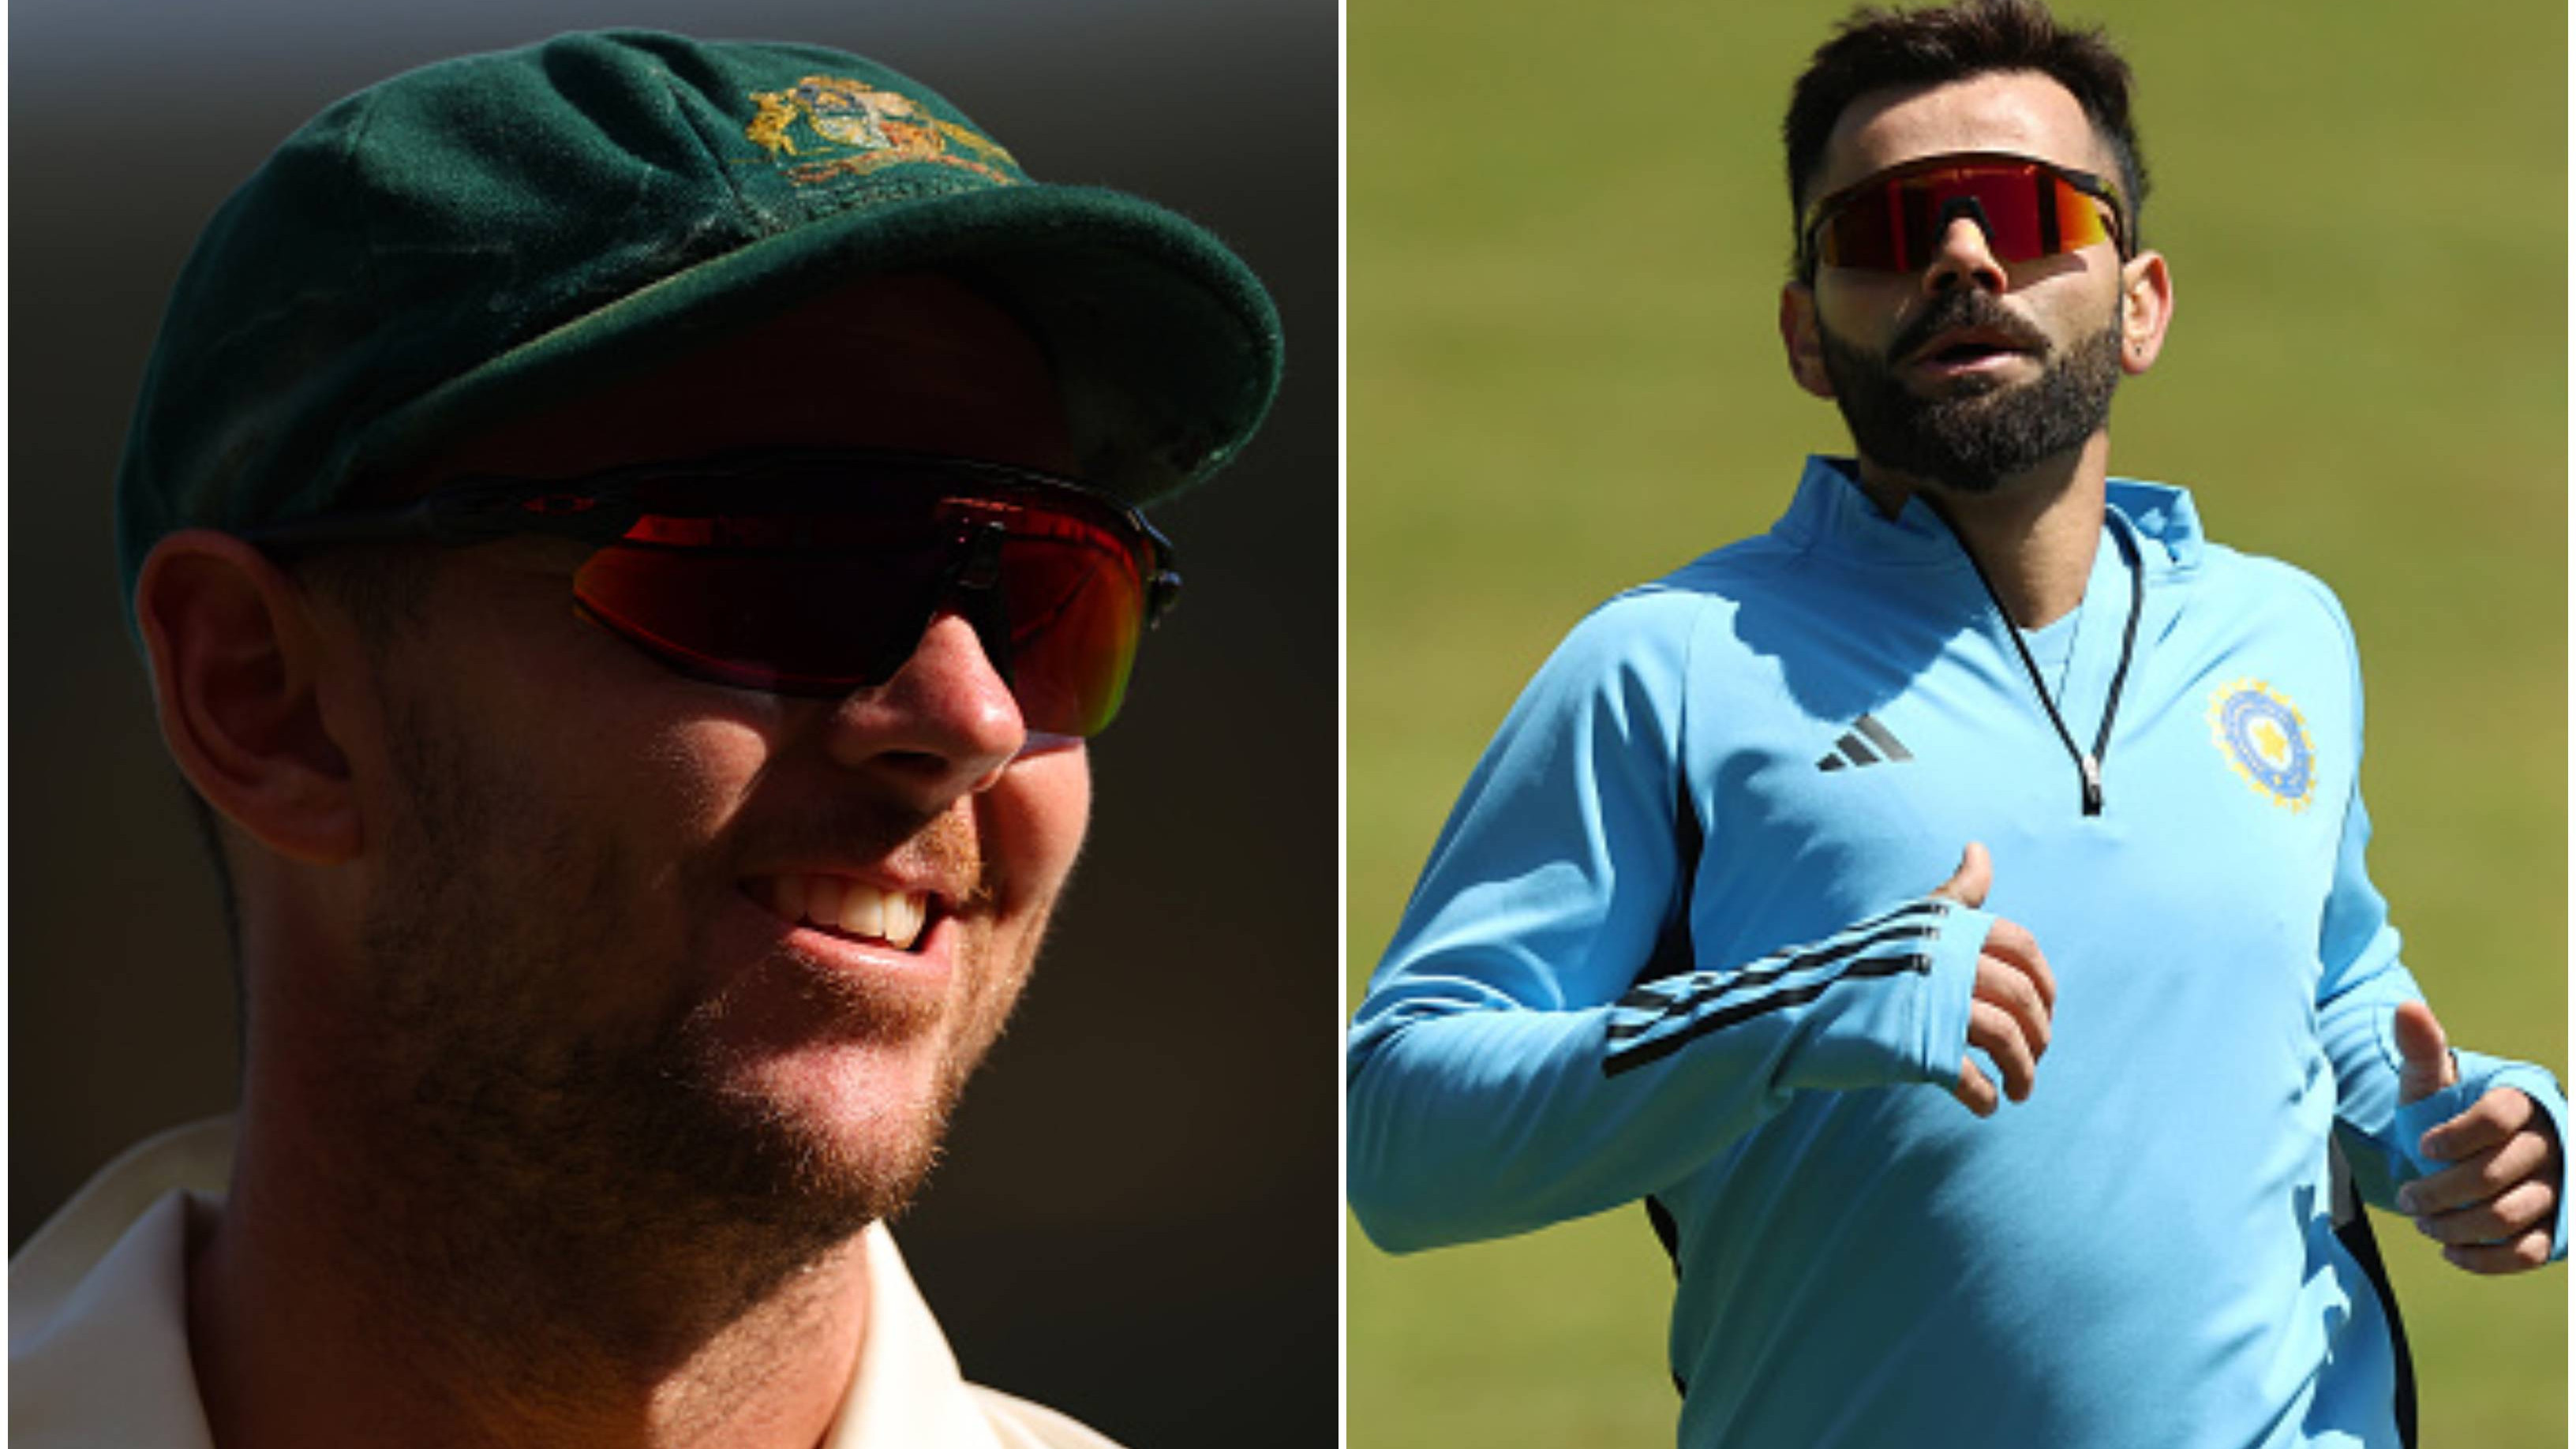 “He is always out there first and leaves last,” Hazlewood lauds Kohli’s work ethic ahead of WTC final